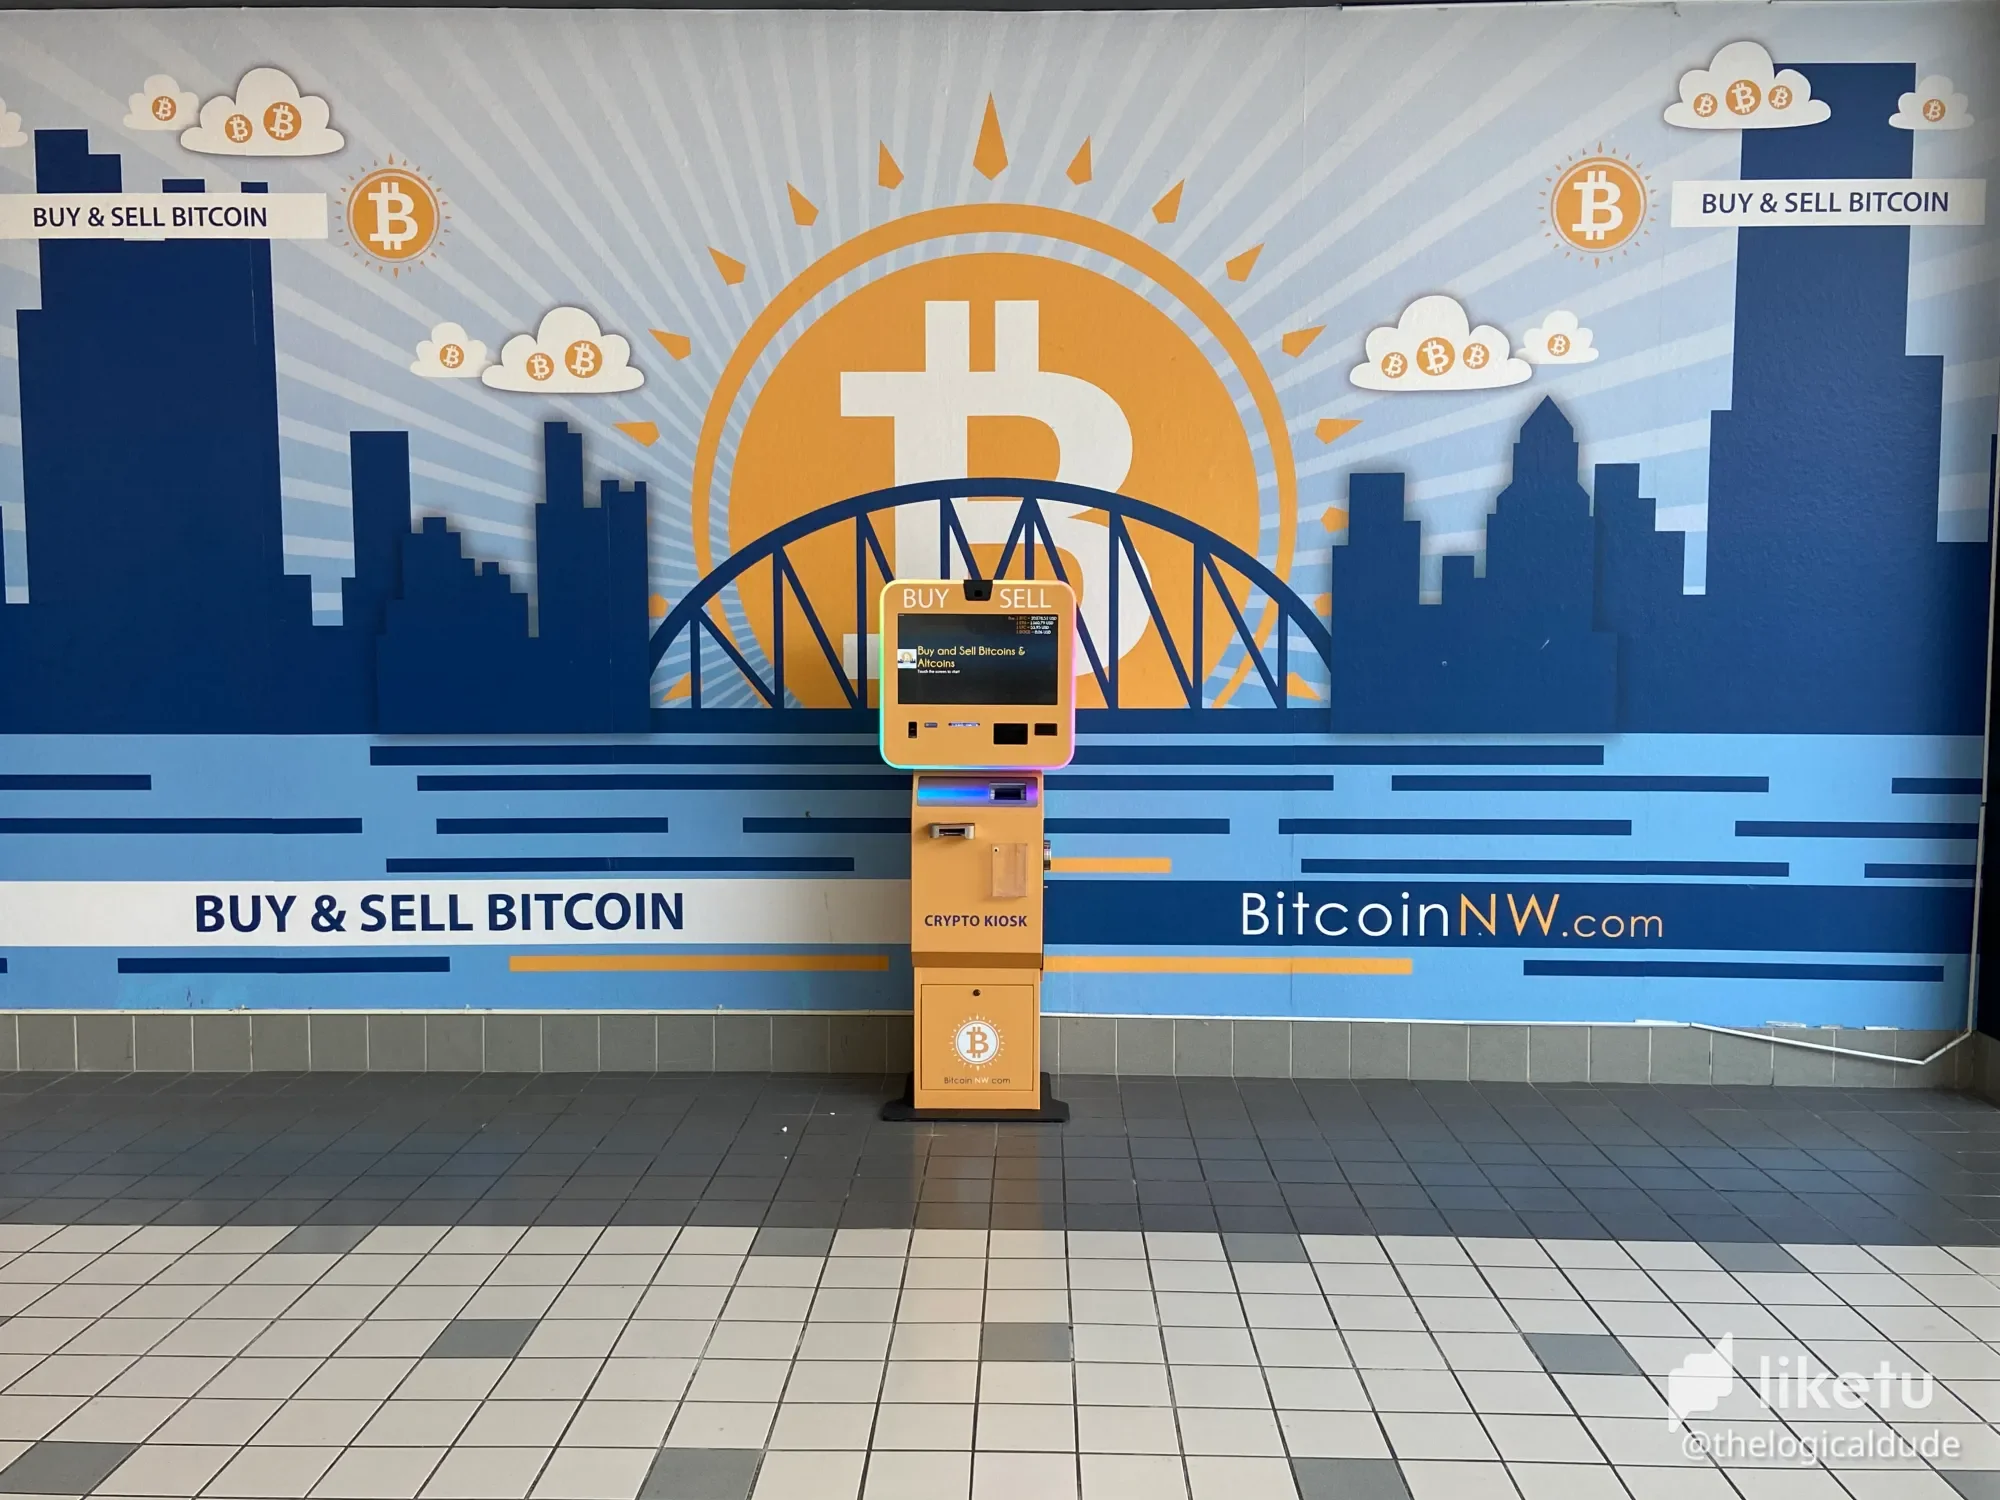 @thelogicaldude/little-trip-to-the-local-bitcoin-atm